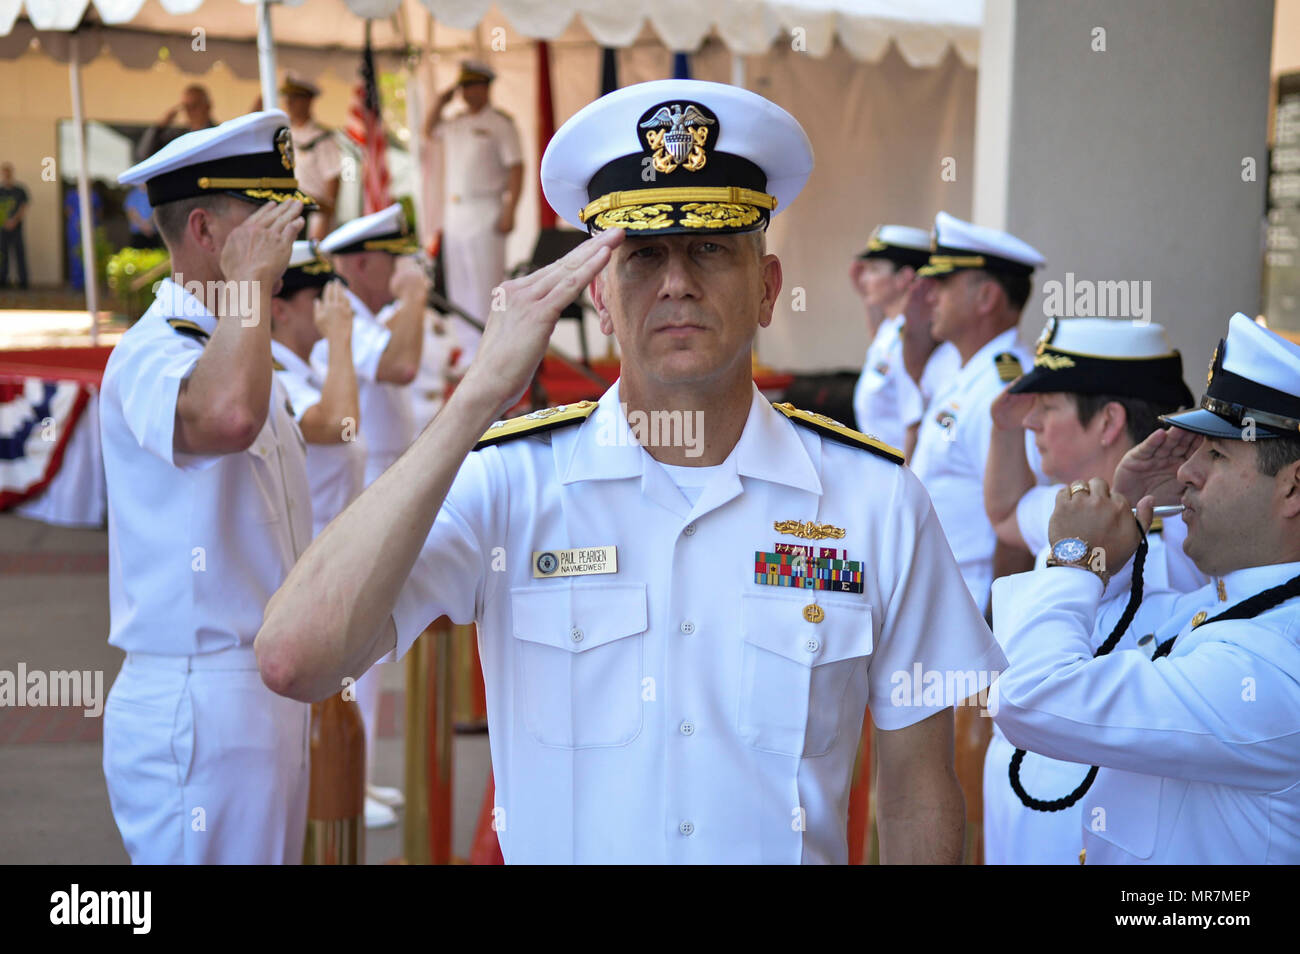 170517-N-IW246-401 SAN DIEGO (May 19, 2017) Rear Adm. Paul D. Pearigen, Commander, Navy Medicine West and chief of the Navy Medical Corps, is rendered honors at the end of a centennial ceremony at Naval Medical Center San Diego (NMCSD). The ceremony was held to celebrate NMCSD’s 100th birthday. The Navy’s first permanent medical facility in San Diego was established in Balboa Park on May 20, 1917 (Photo by Culinary Specialist Petty Officer 2nd Class Luther C. Smith Jr./Released) Stock Photo